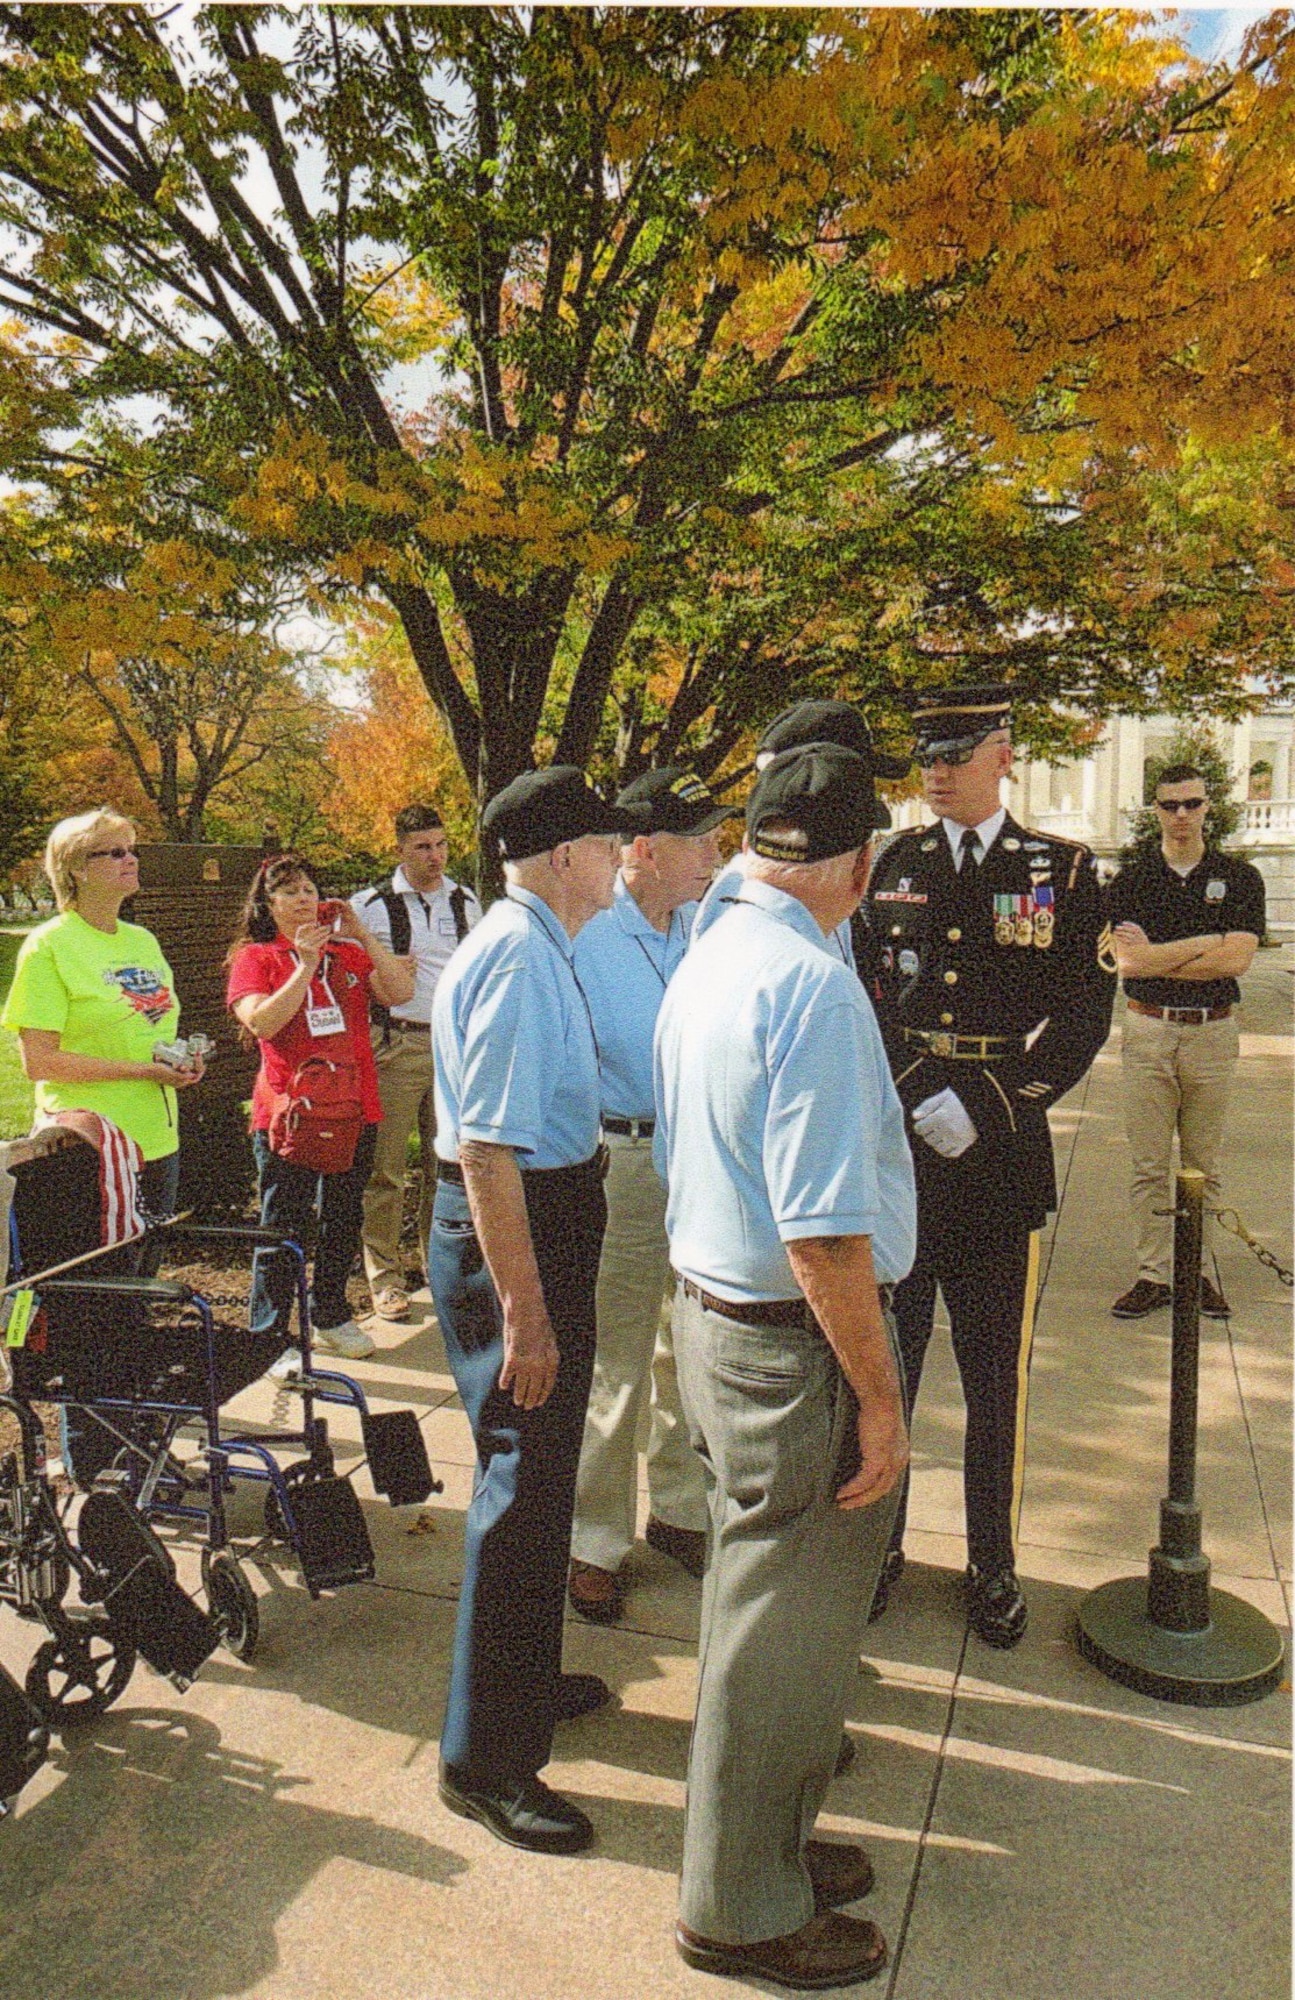 Allen Larsen and three other Austin Honor Flight veterans from Lakeway, Texas, receive instructions from the U.S. Army Sergeant at the Tomb of the Unknown Soldier before they take part in a memorial ceremony.  